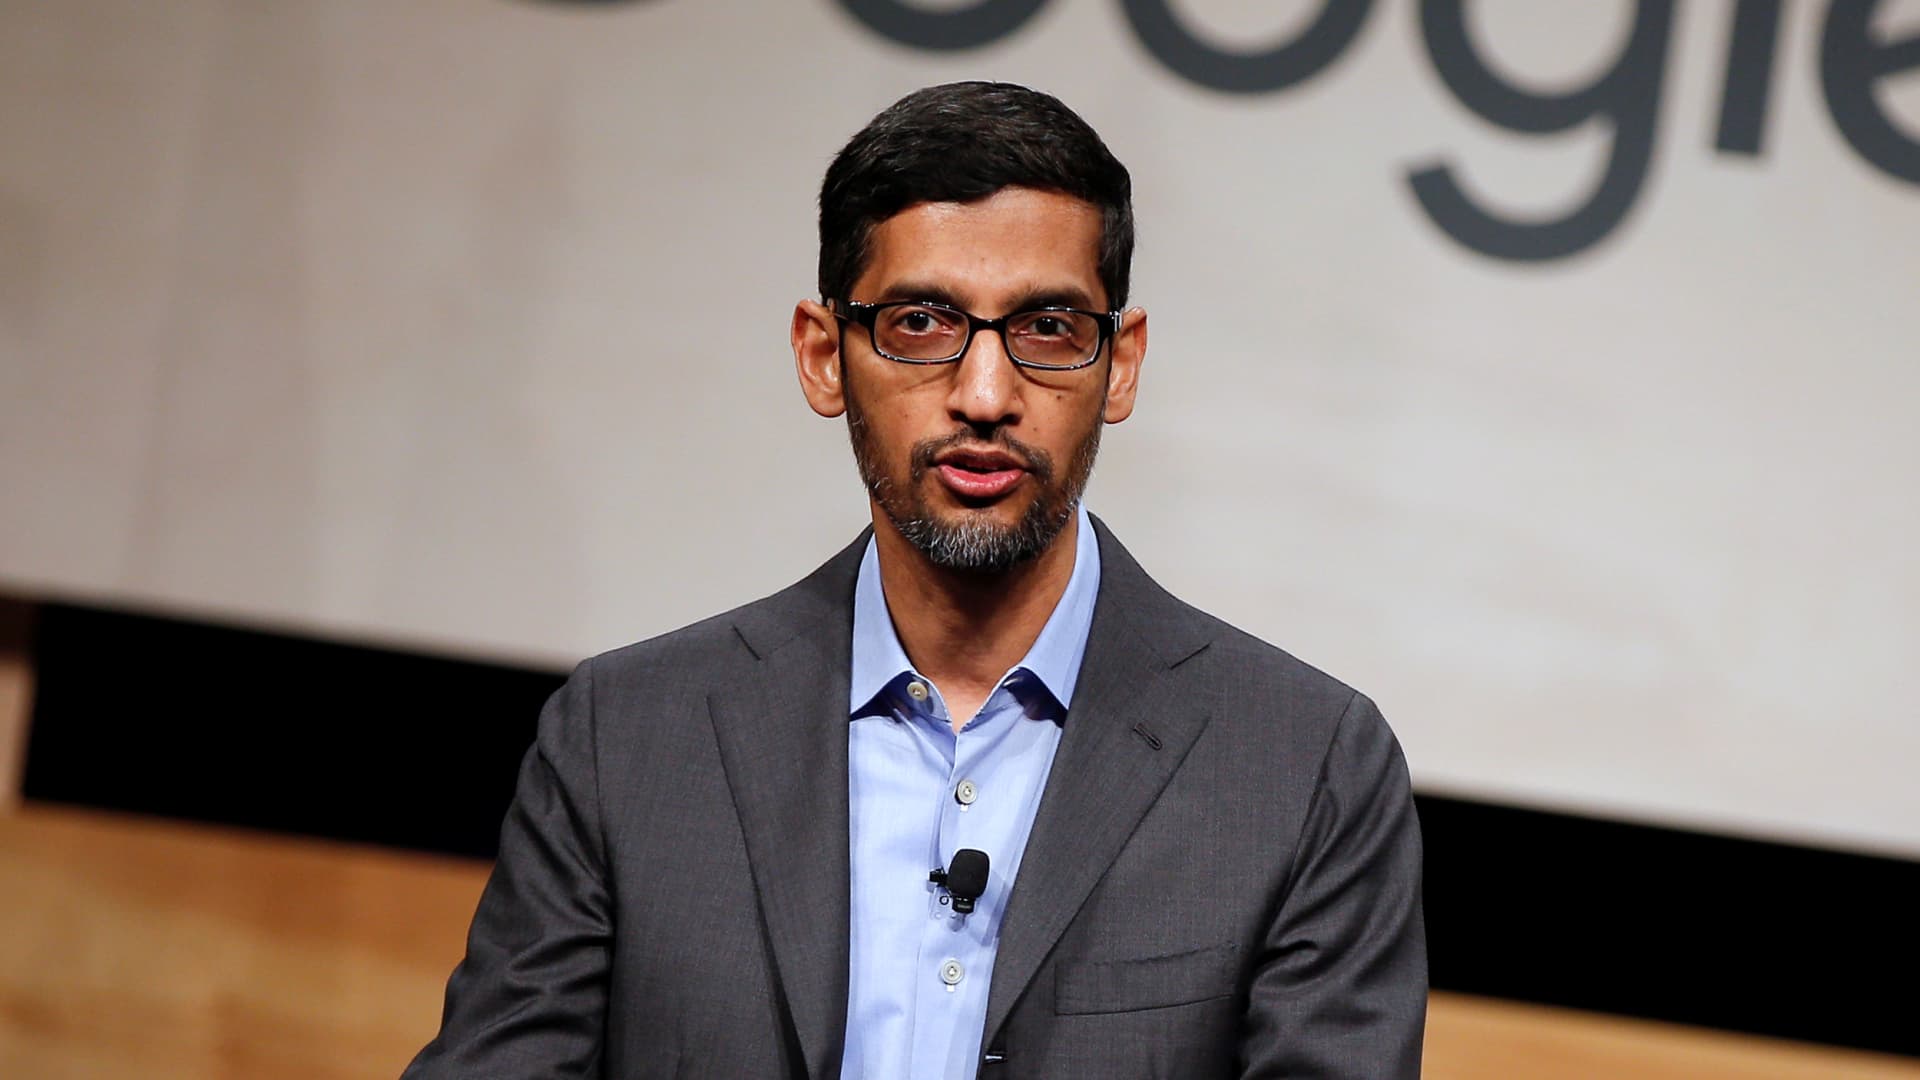 Google CEO tells employees return to office won't happen until at least June 1